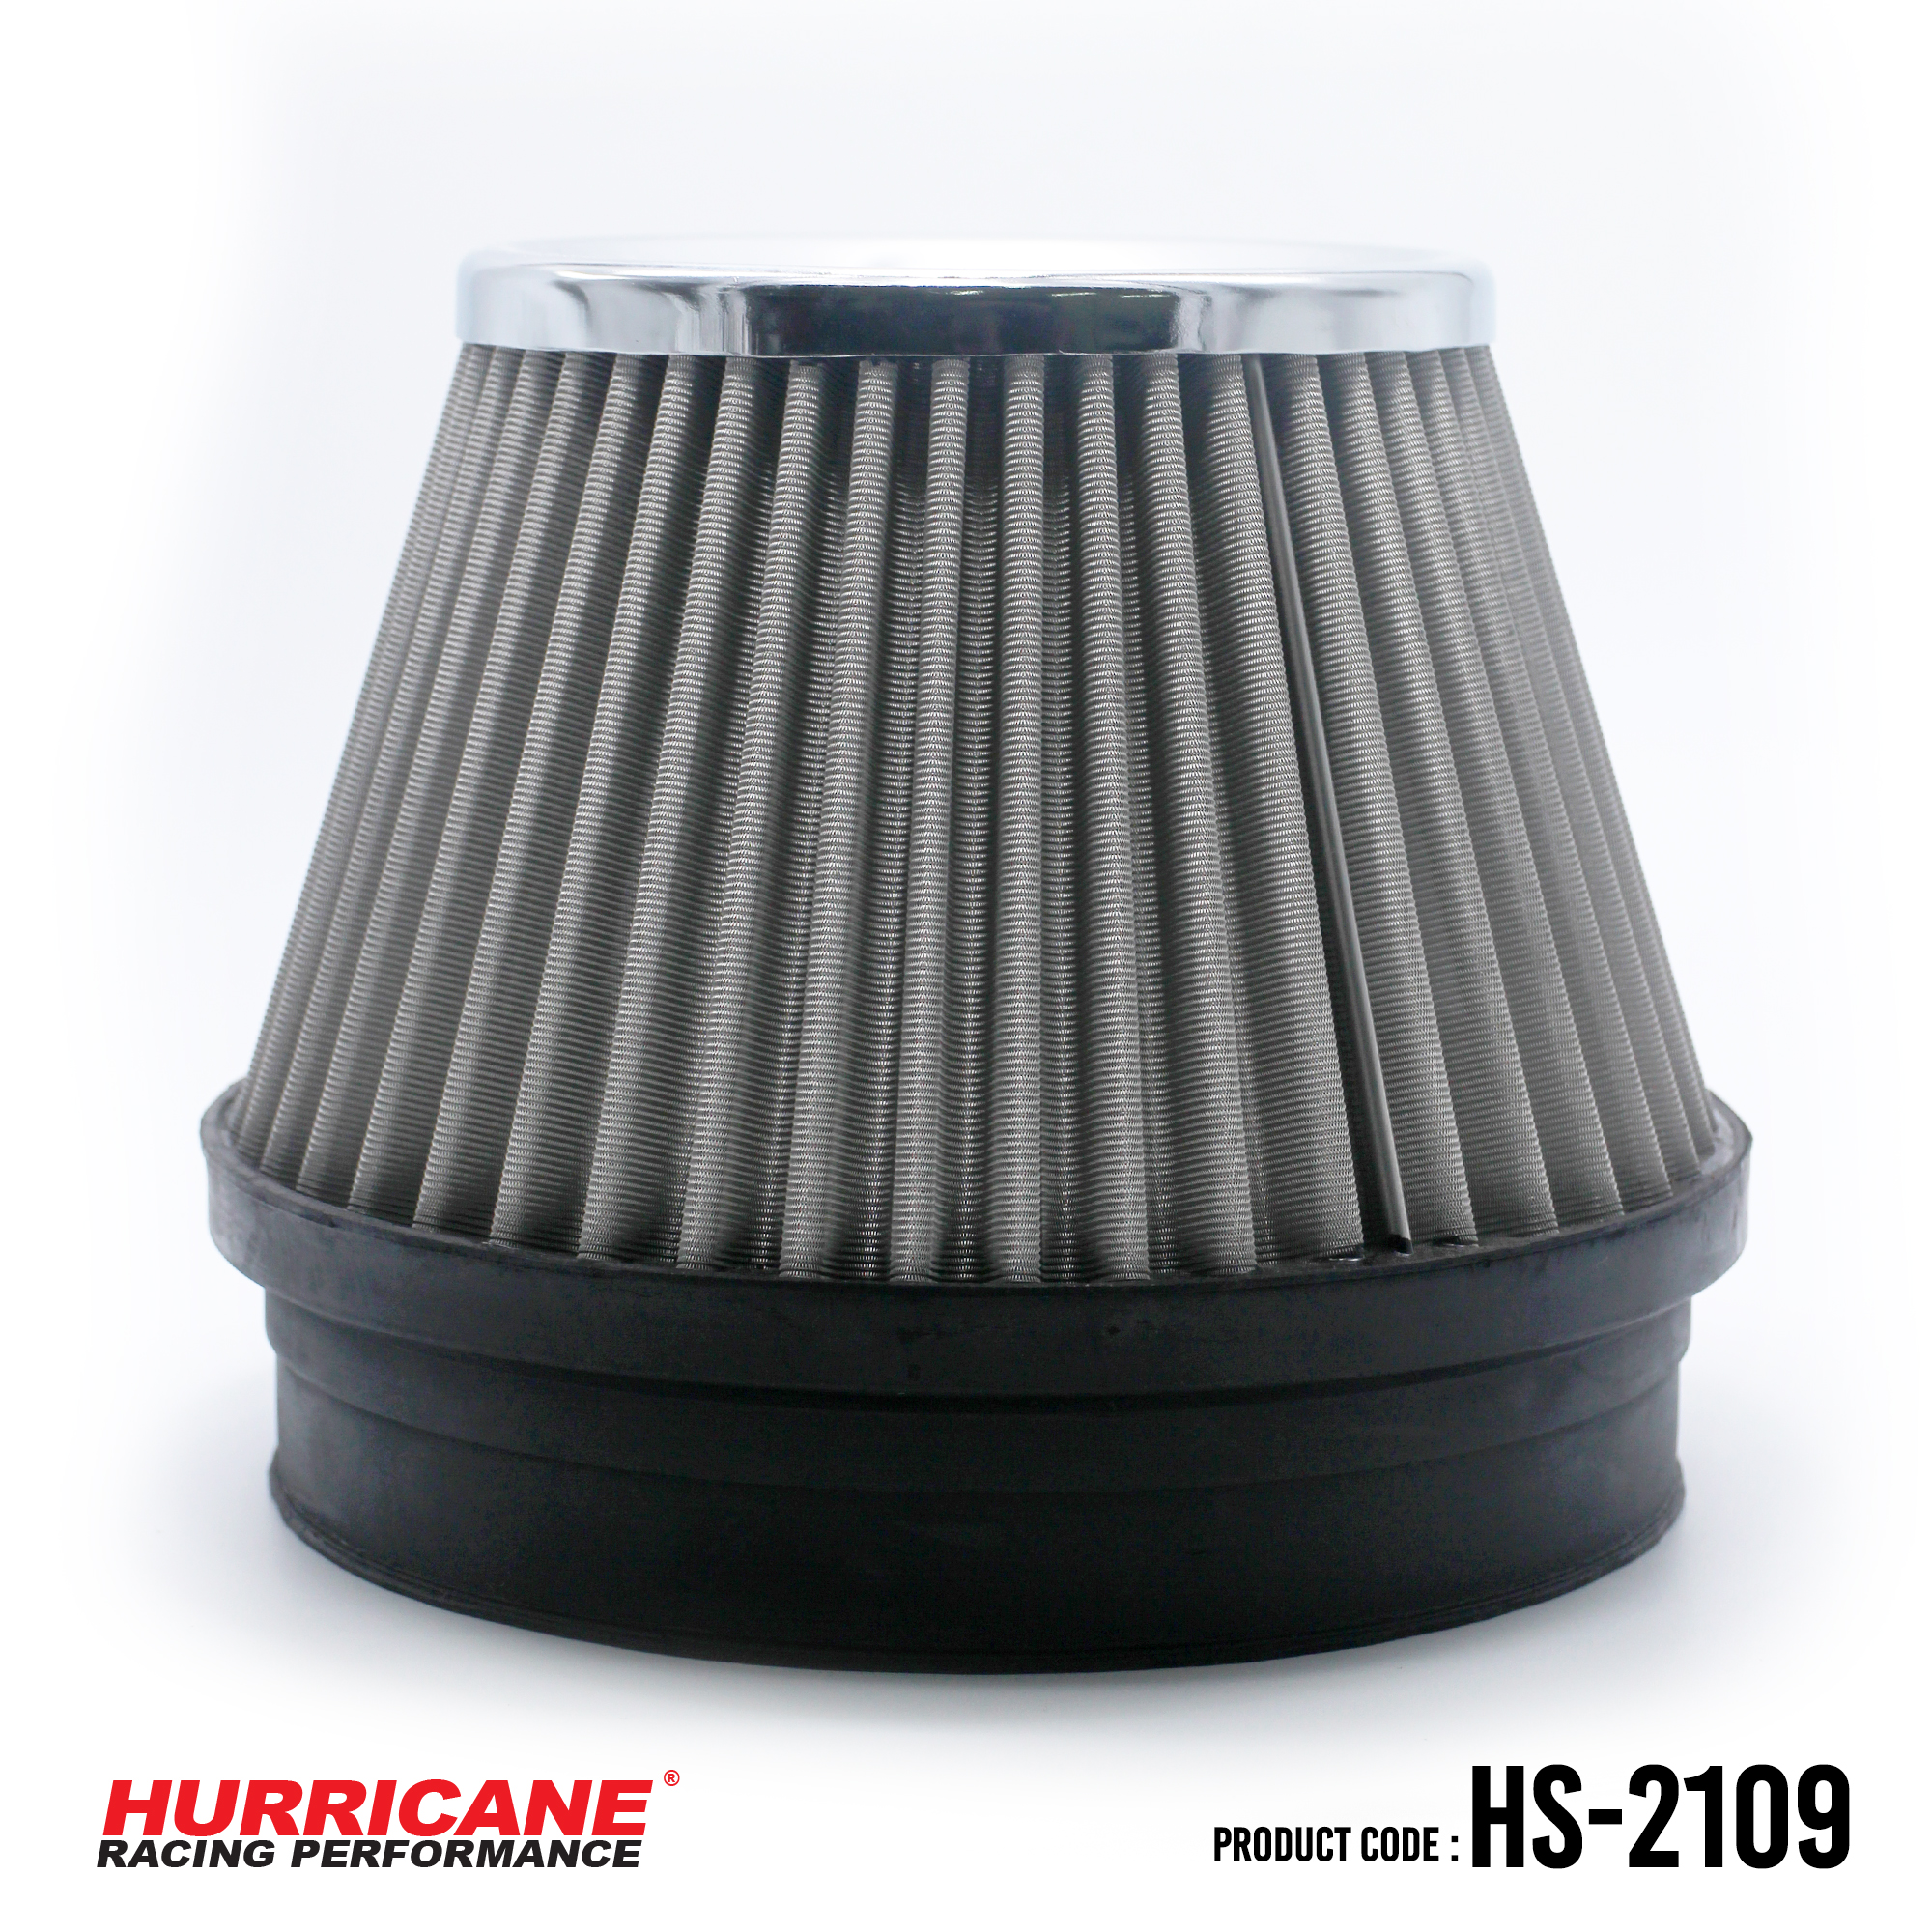 HURRICANE STAINLESS STEEL AIR FILTER FOR HS-2109 กรองเปลือย